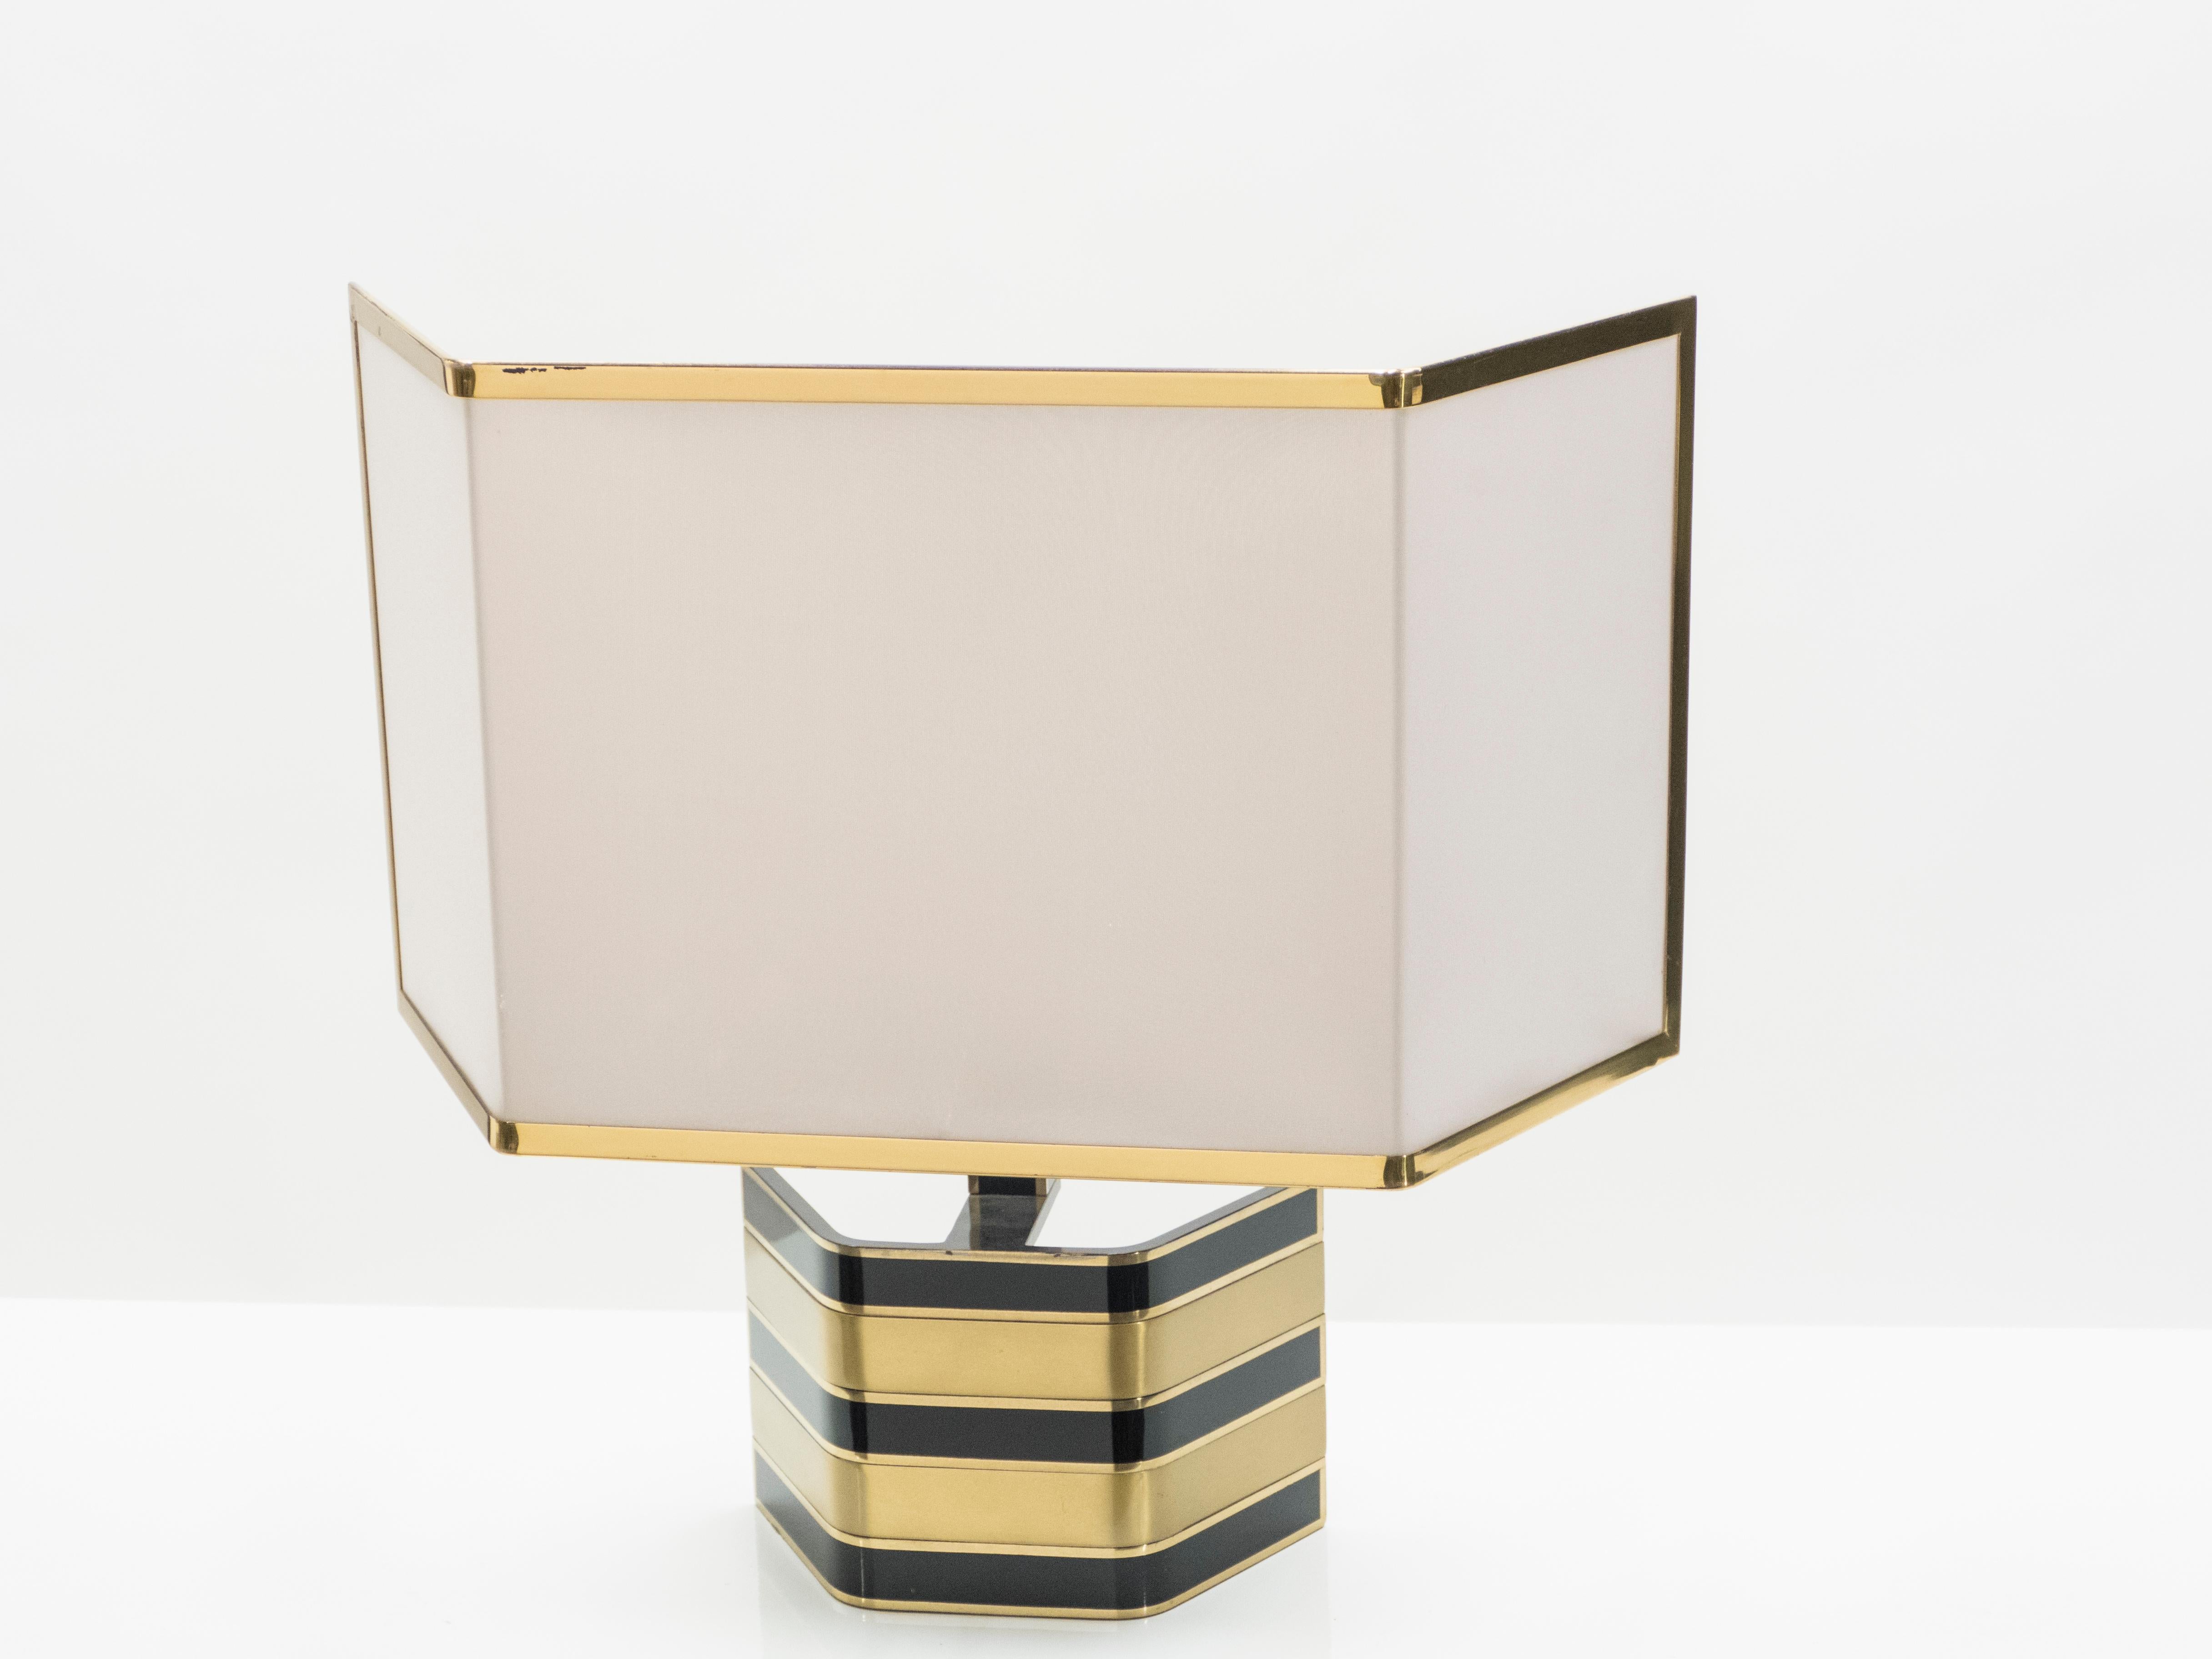 This rare lamp possesses the unique allure that is held by unconventional, decorative designs, most notably those by Italian metal designer Romeo Rega. Cool brass and sleek black lacquer form a combination that is immediately arresting and chic. The